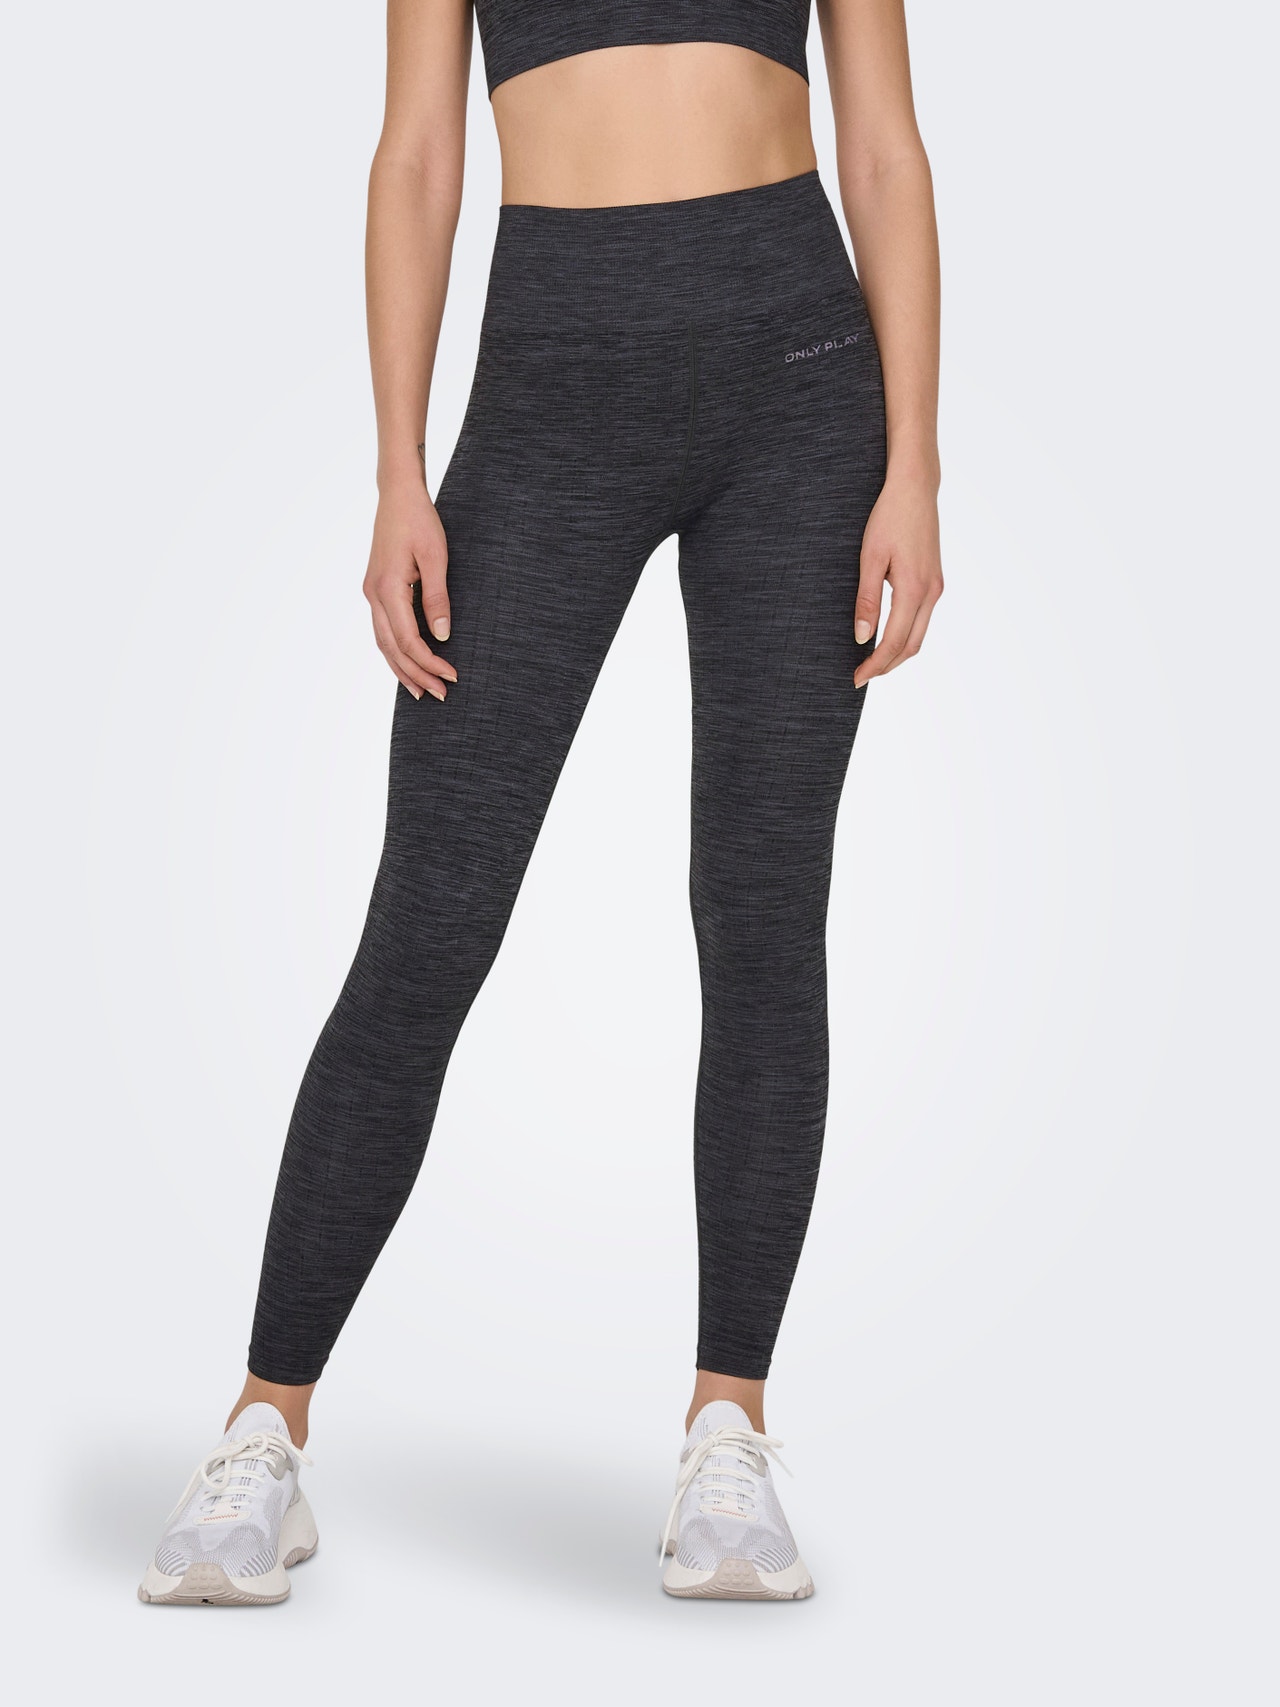 Highwaisted circular knit Training Tights with 20% discount!